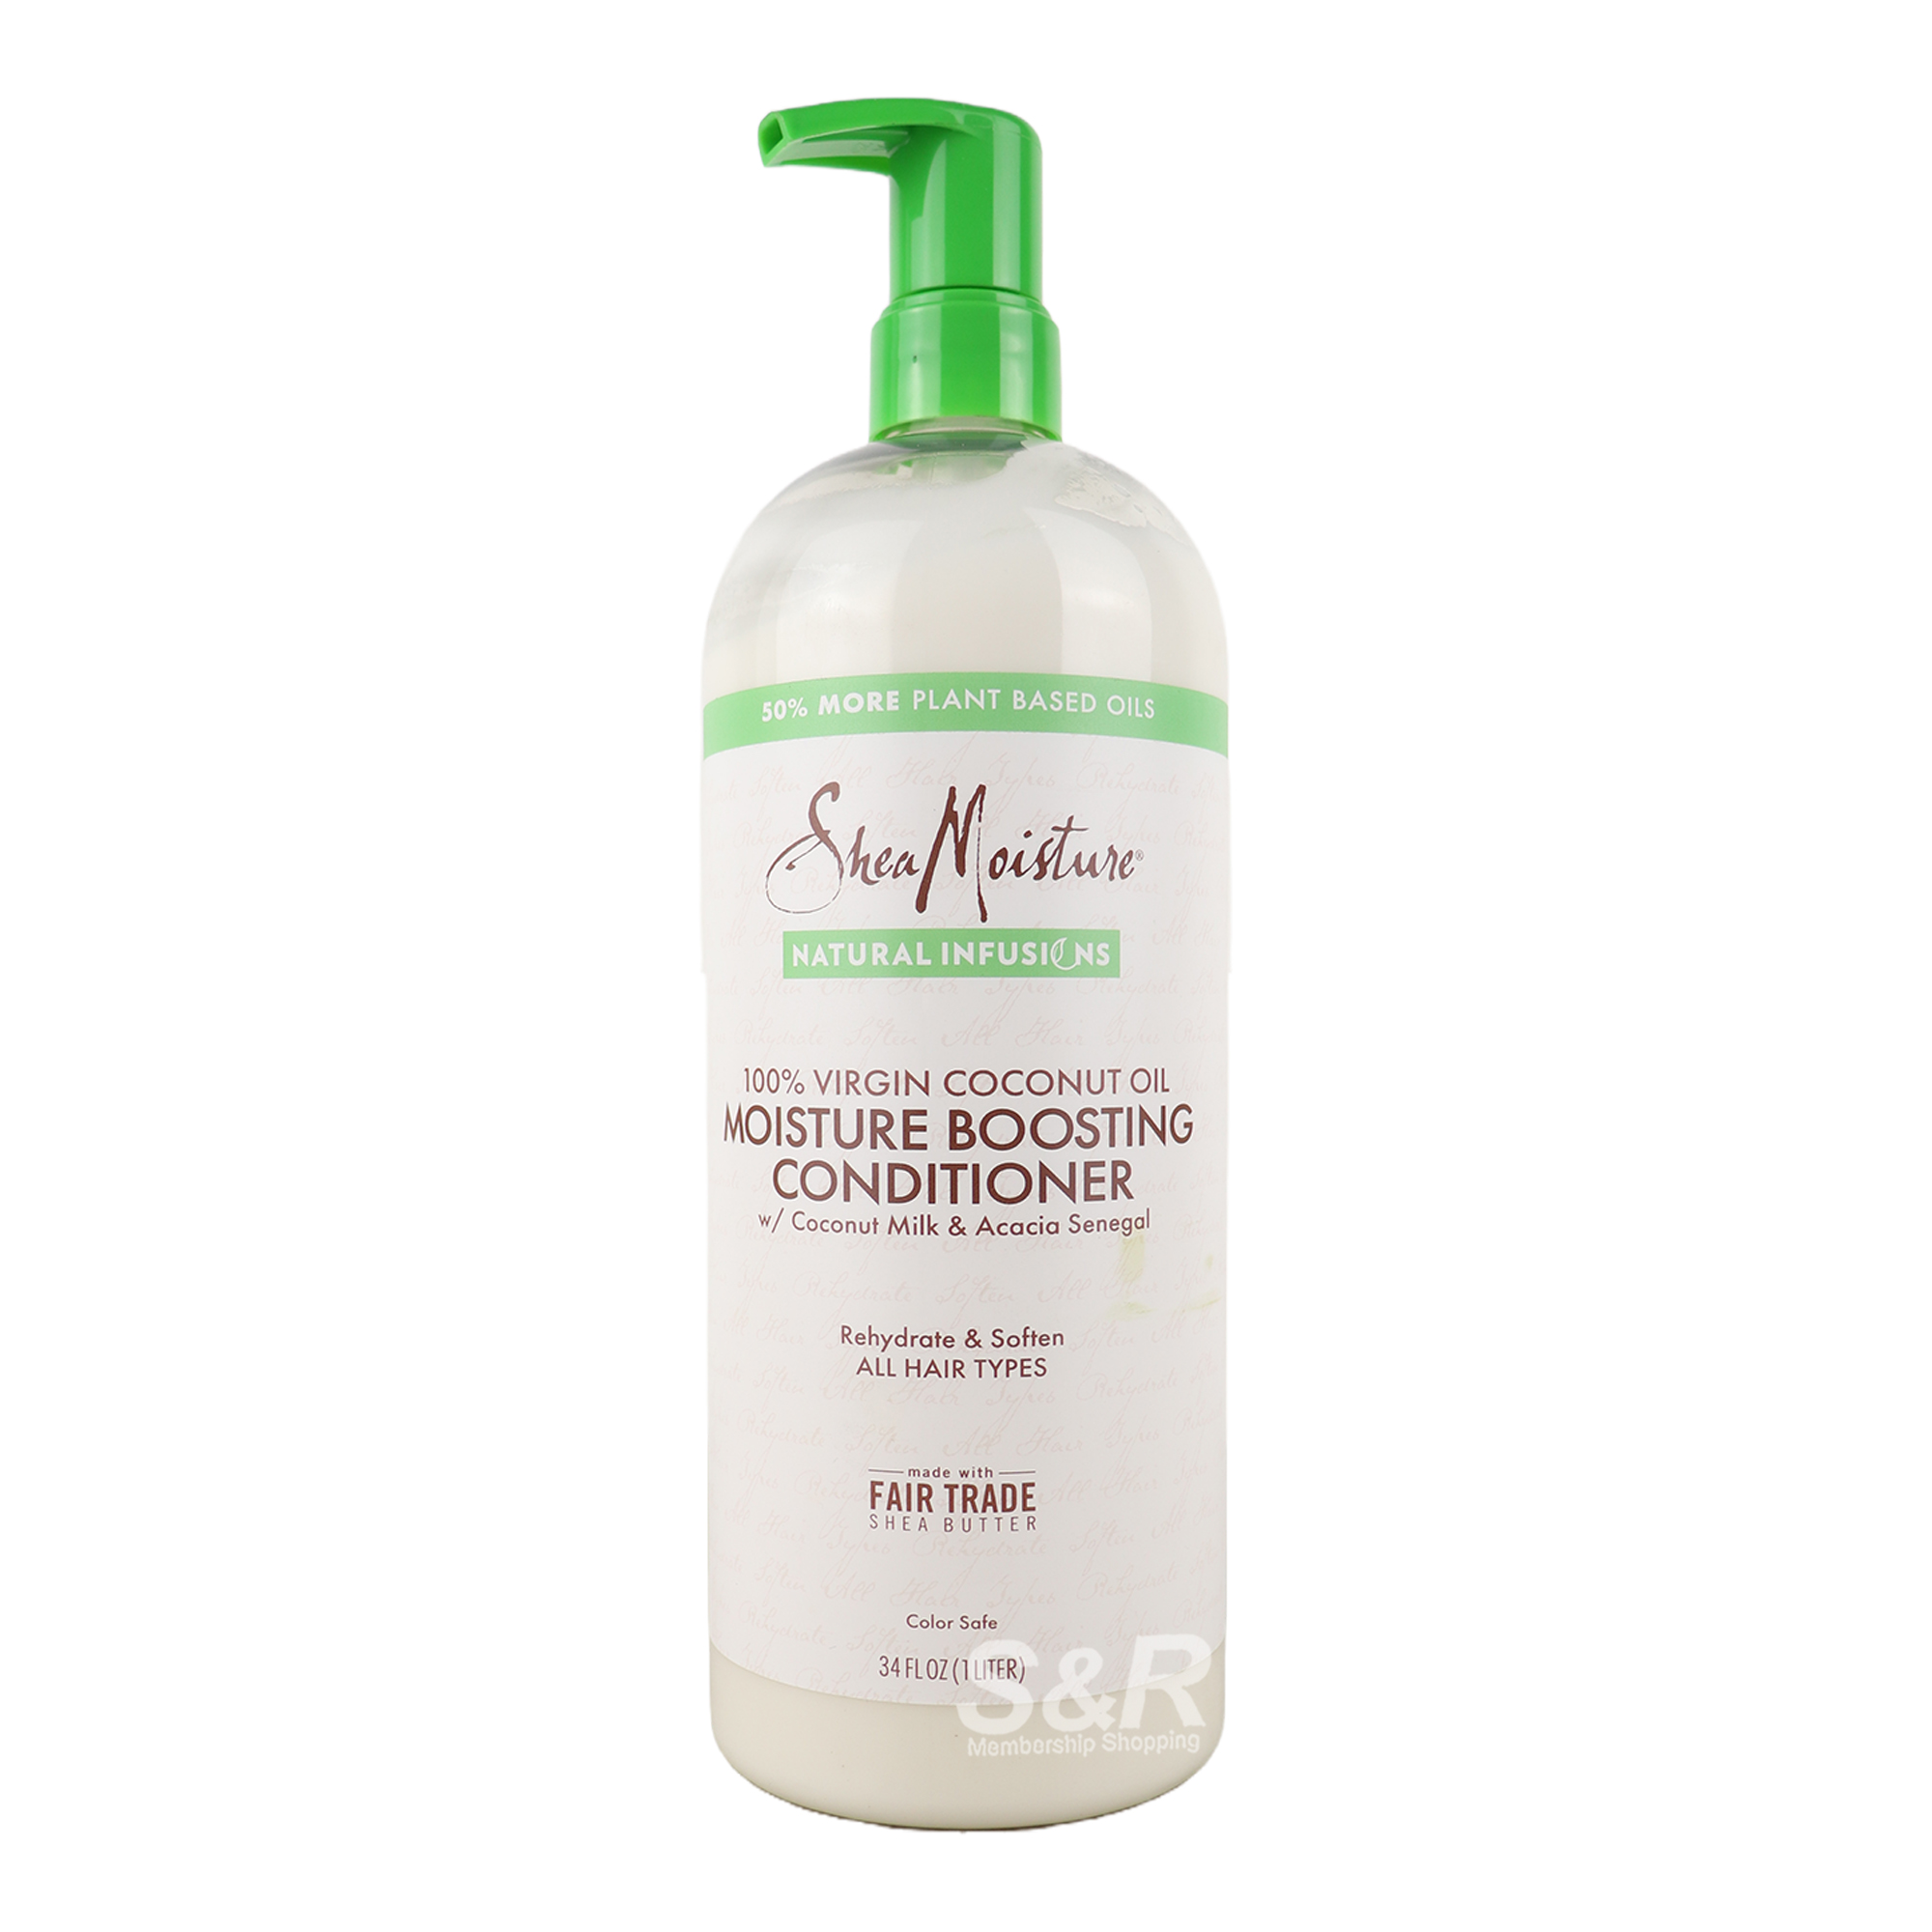 Shea Moisture Natural Infusions Moisture Boosting Conditioner 1L